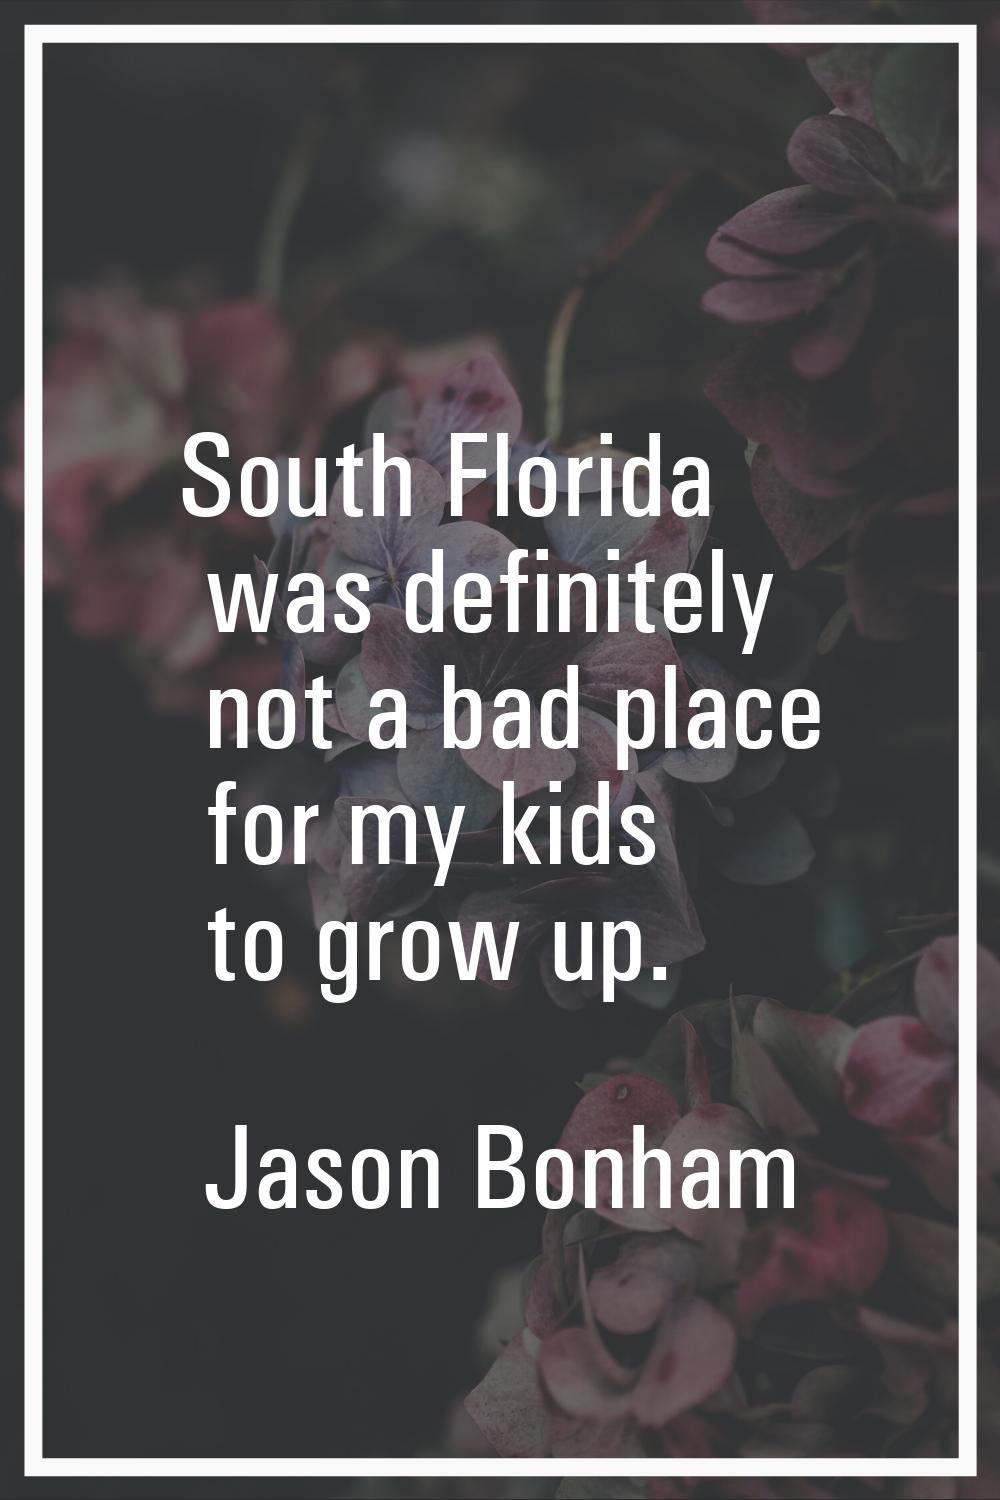 South Florida was definitely not a bad place for my kids to grow up.